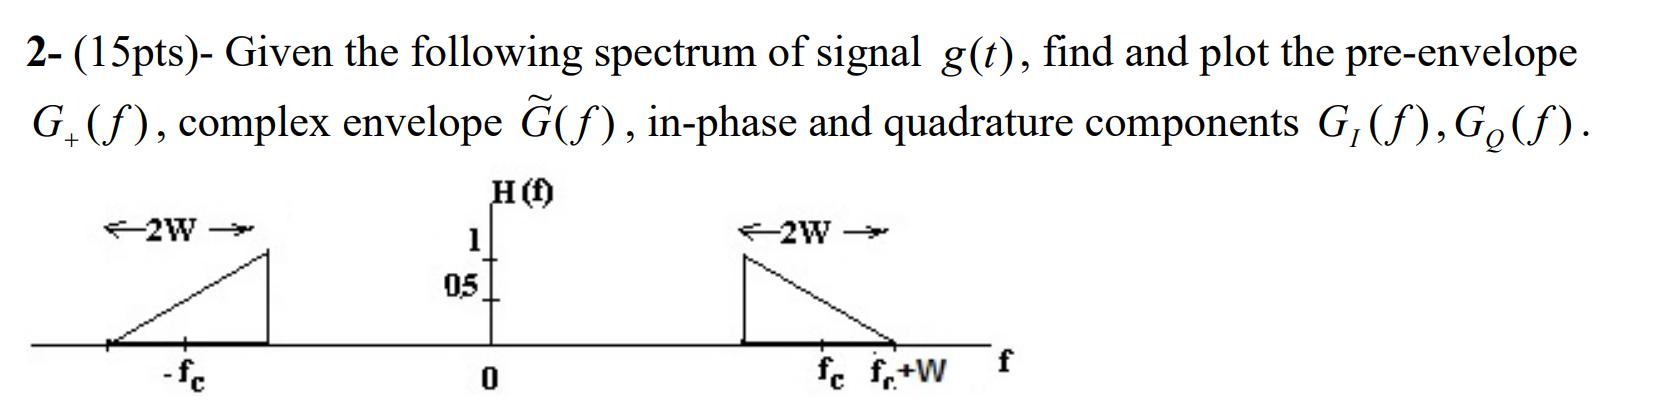 2- (15pts)- Given the following spectrum of signal g(t), find and plot the pre-envelope G (f), complex